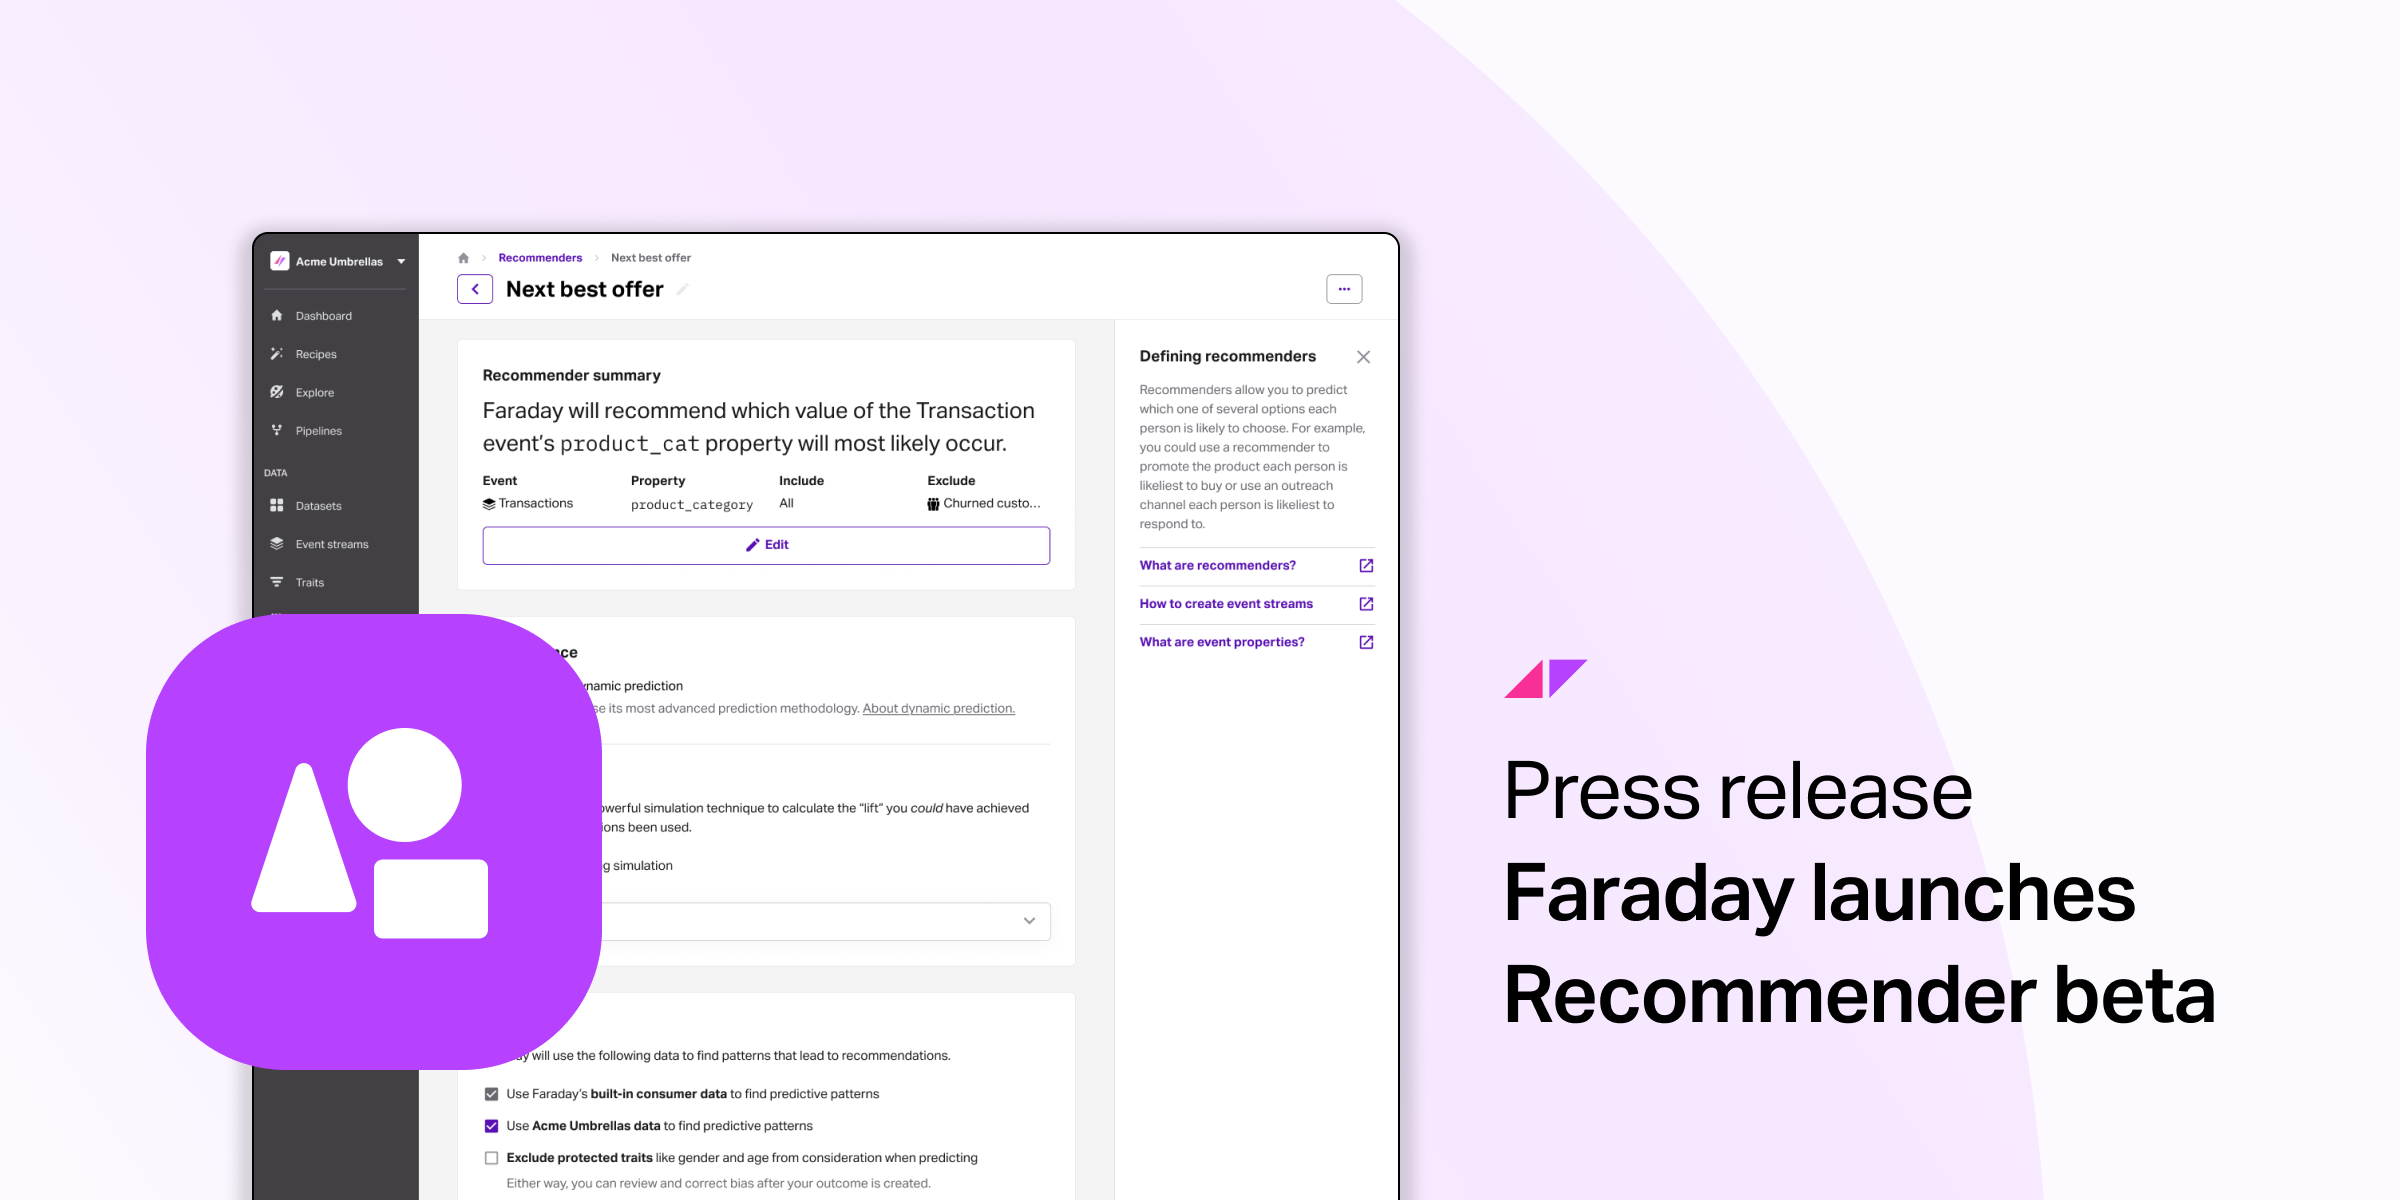 Press release: Faraday launches Recommendations product into beta